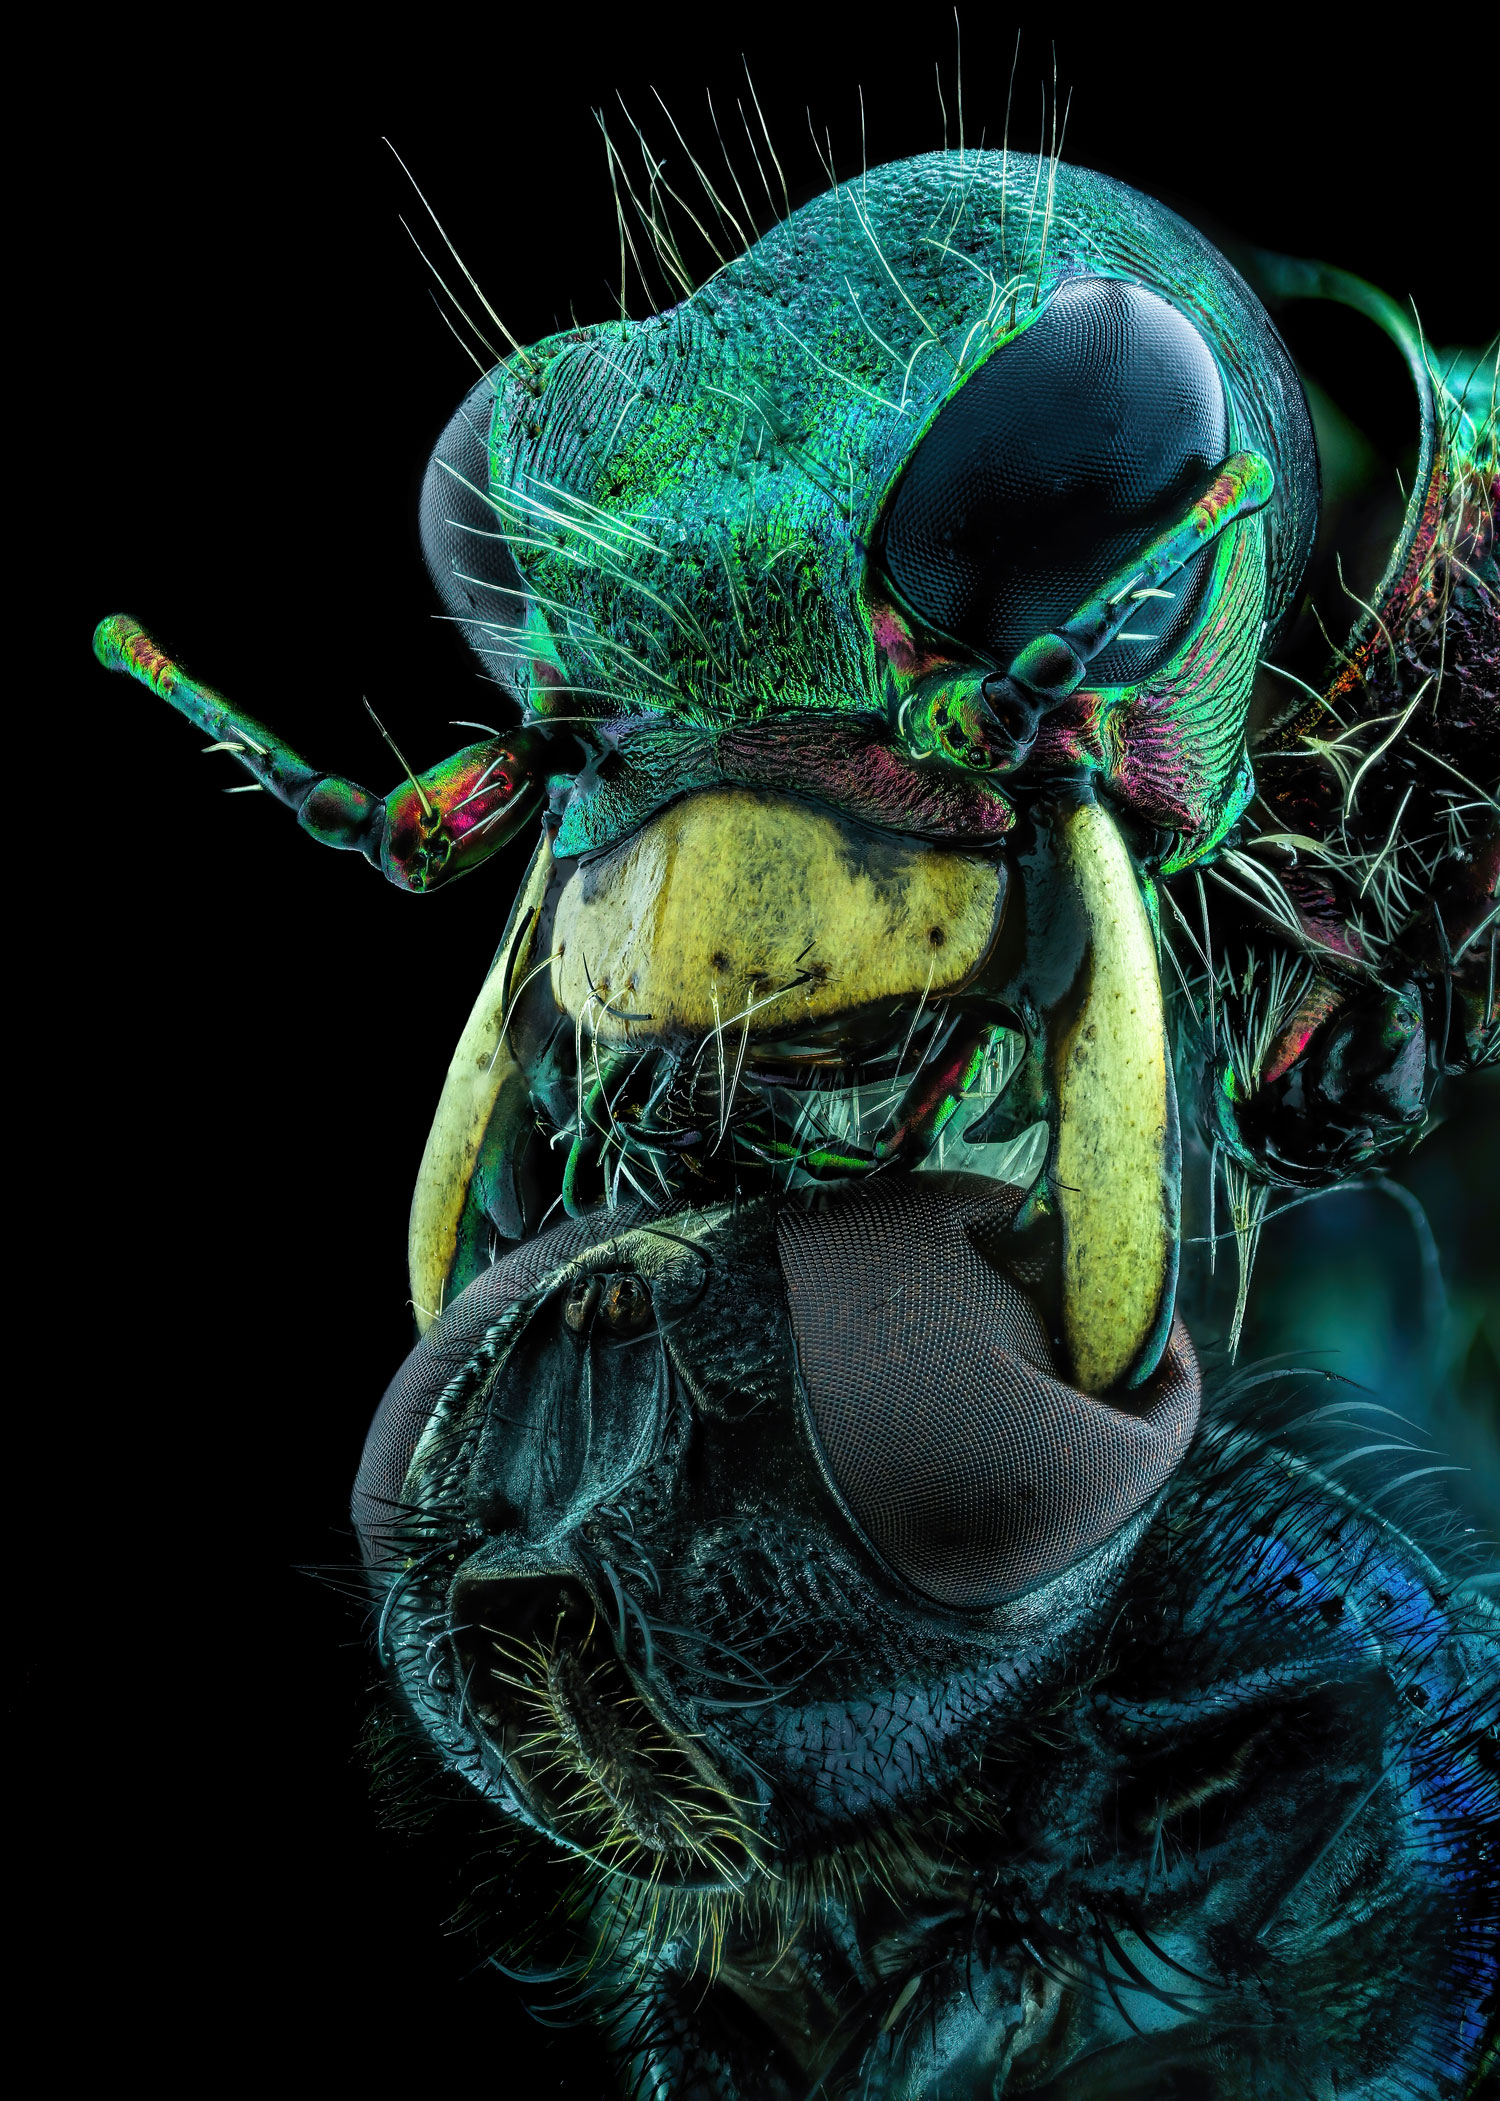 the face of a tiger beetle holding a fly under its chin. The beetle is shown in bright greens and yellows, with huge dark eyes, A deadly predator